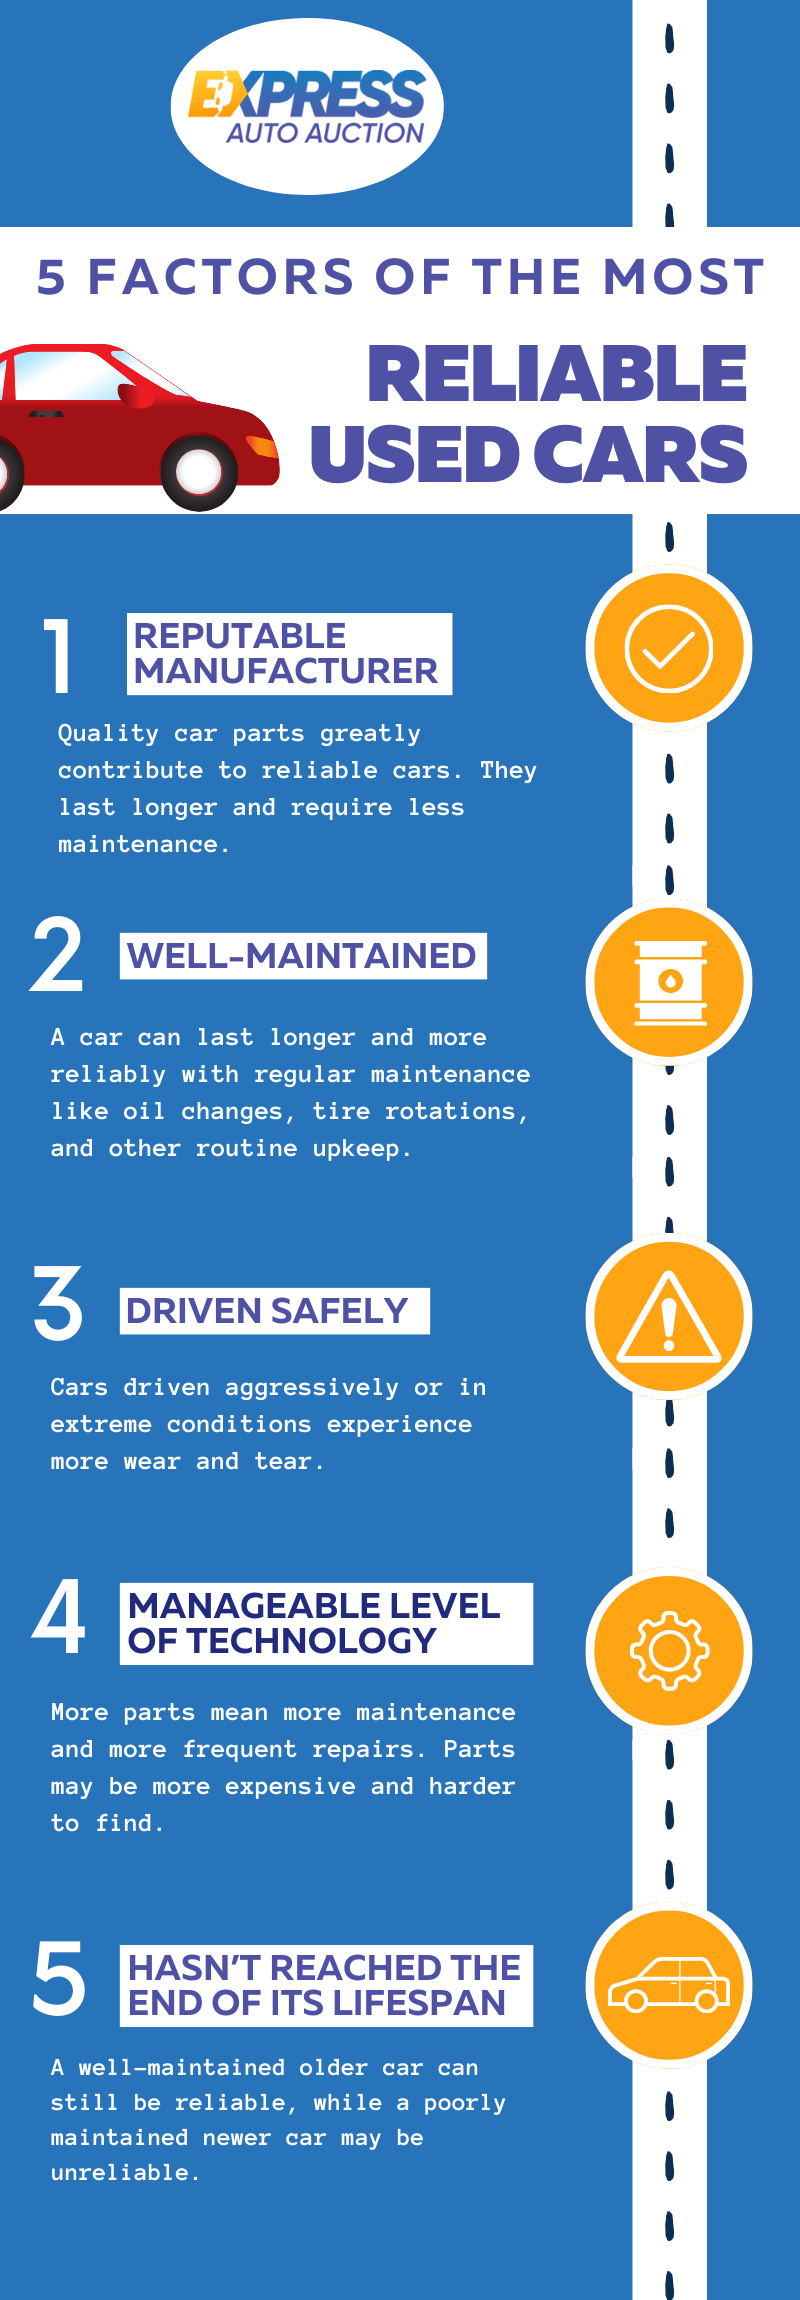 Here's an infographic to help you determine a reliable car from an unreliable one.